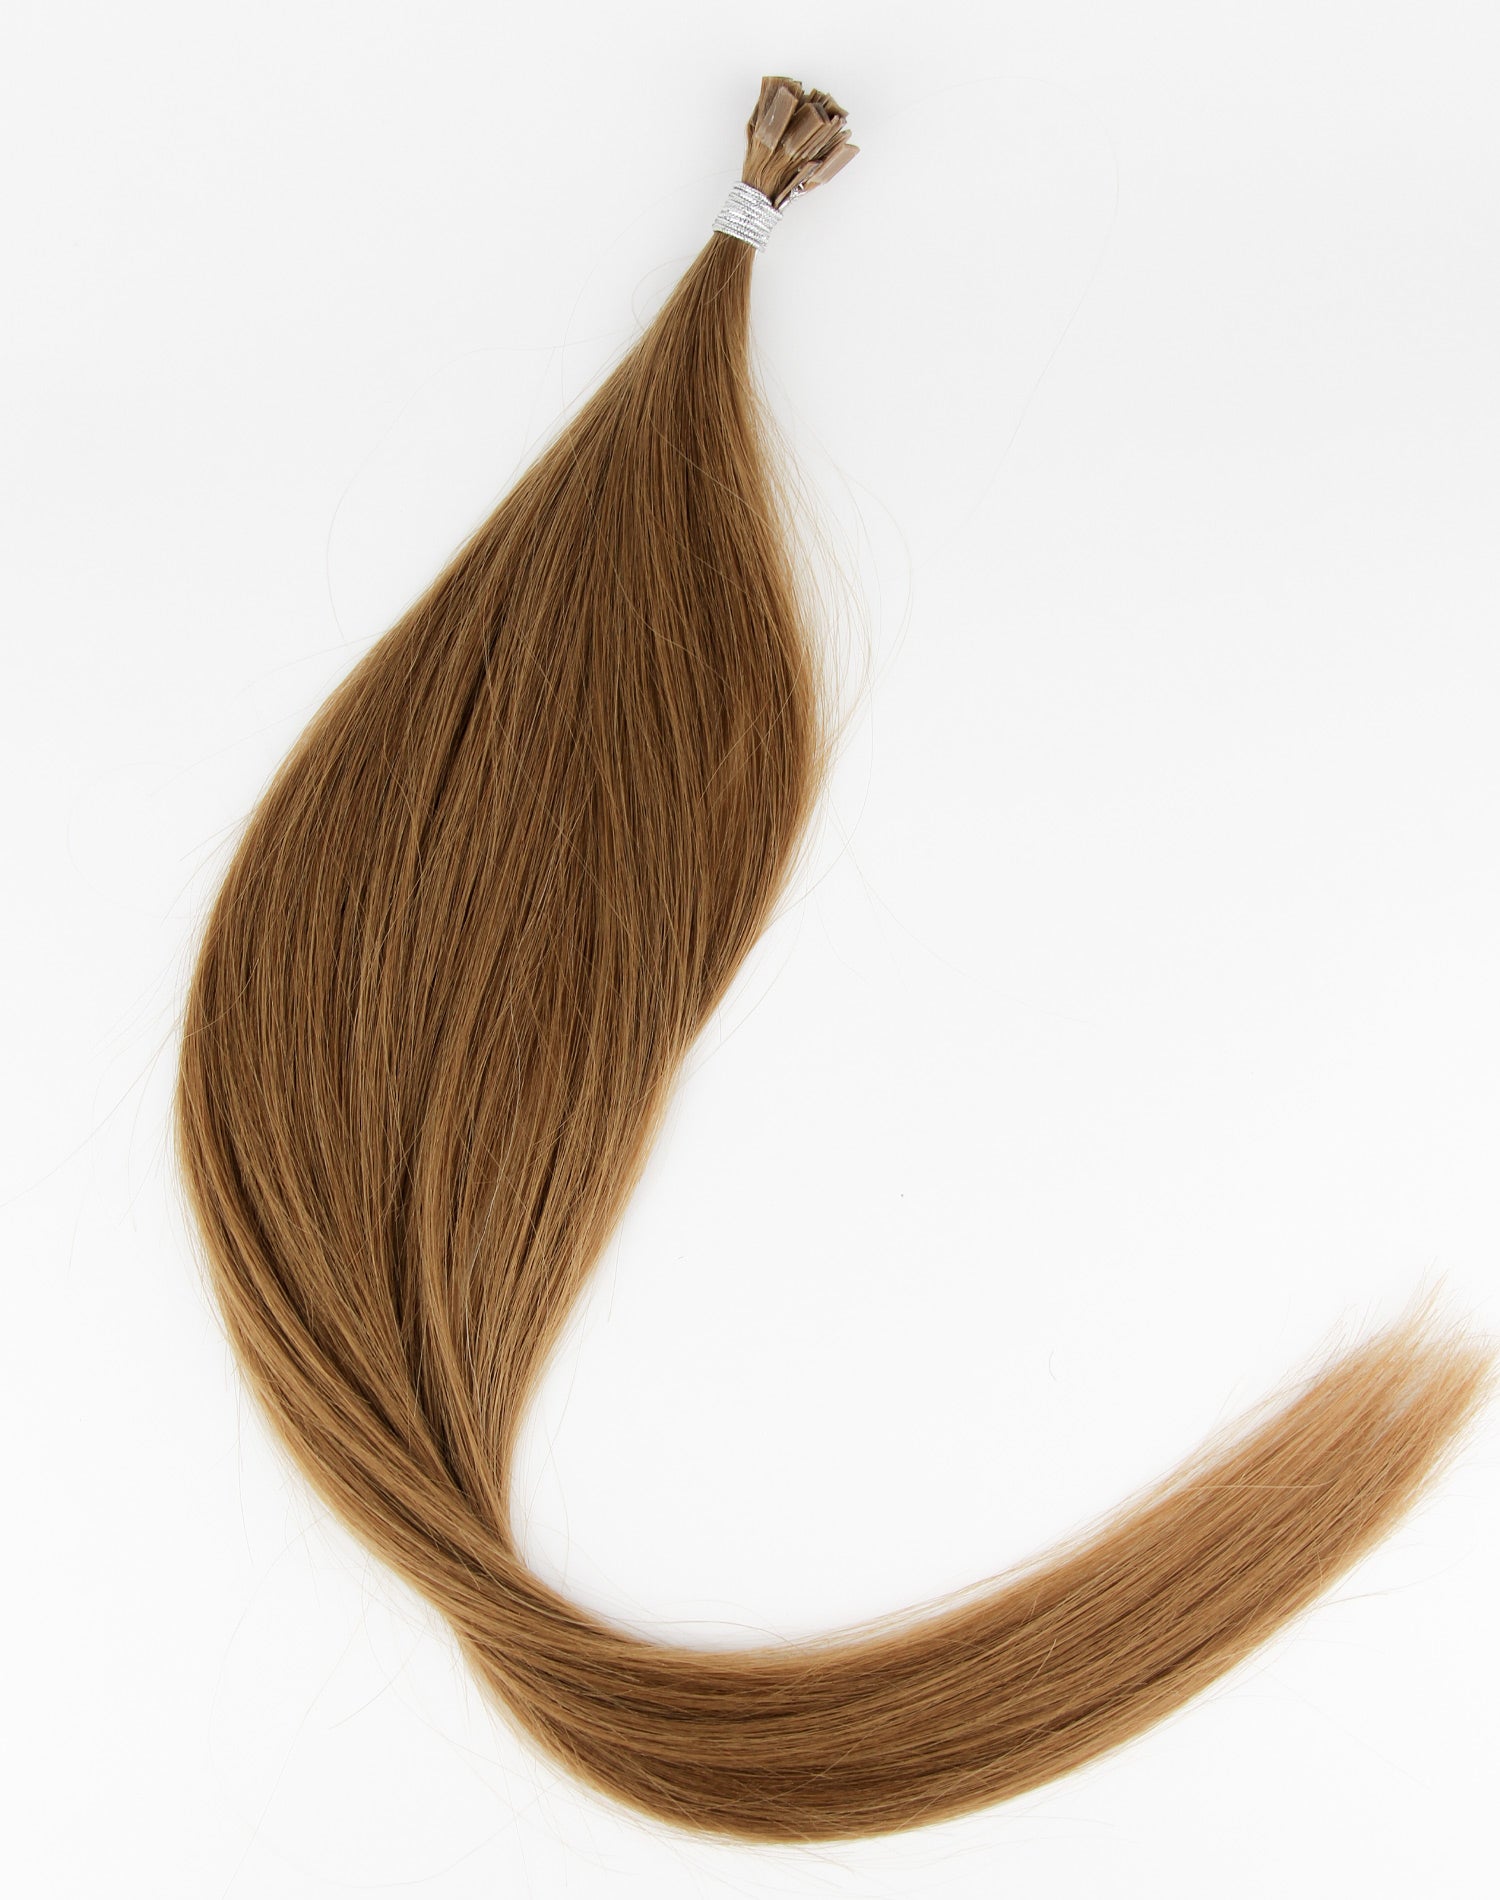 Bombshell Keratin Hair Extensions - Daiquri At Marquee